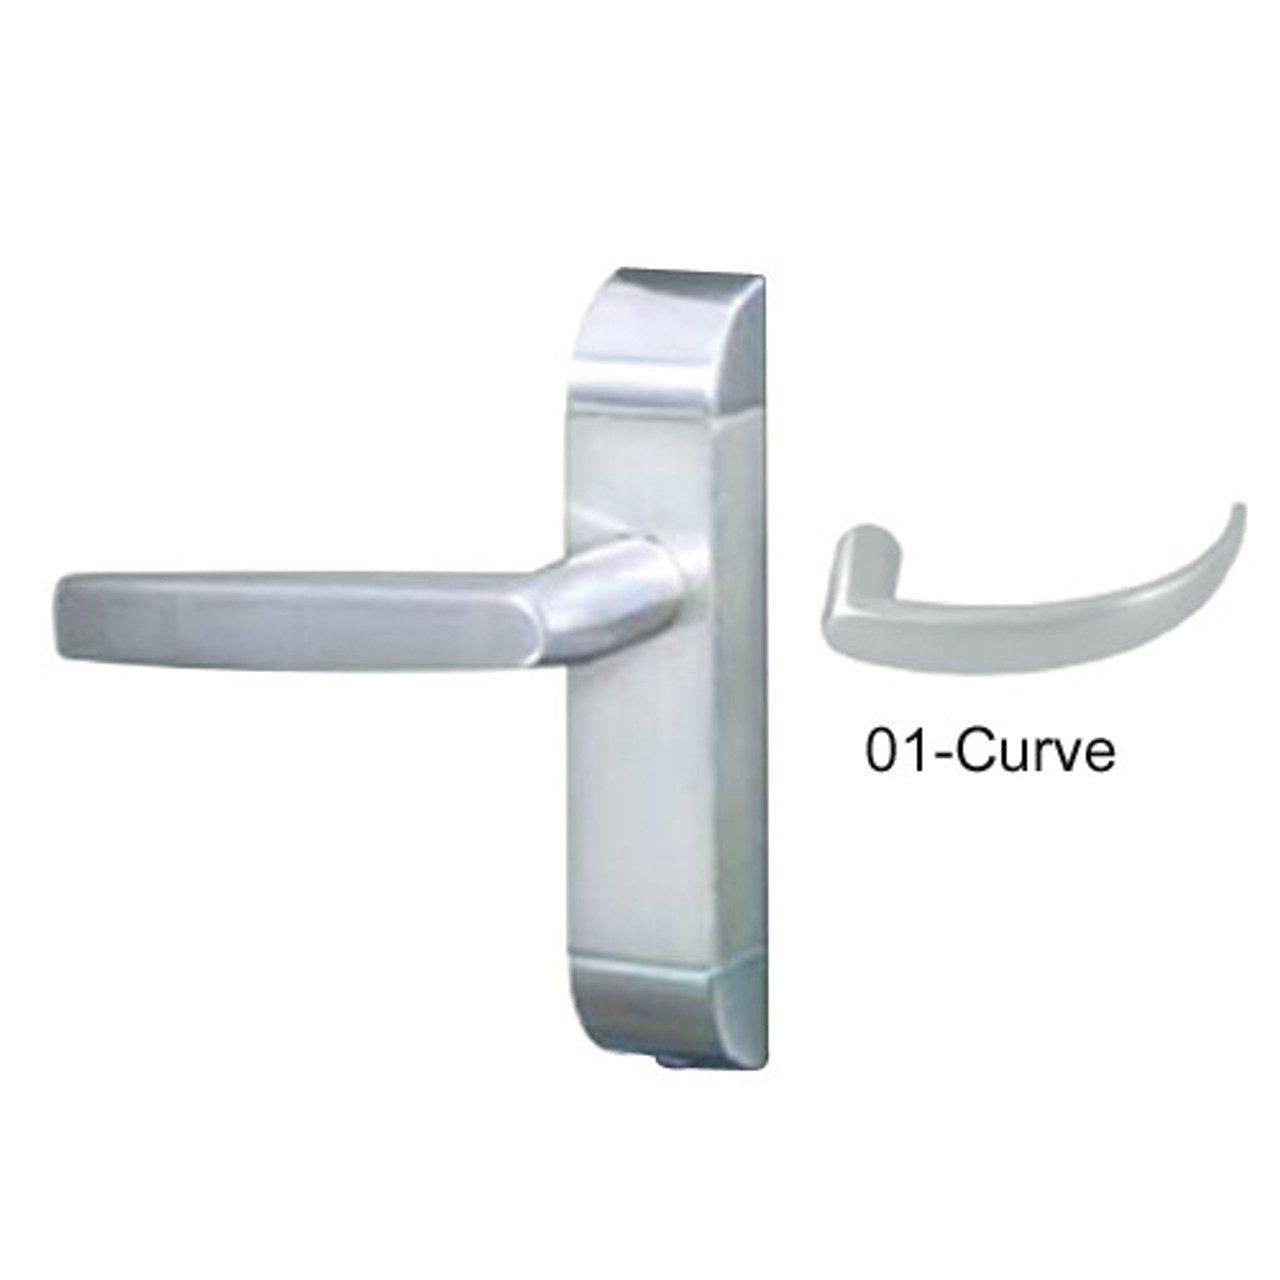 4600M-01-652-US32 Adams Rite Heavy Duty Curve Deadlatch Handles in Bright Stainless Finish